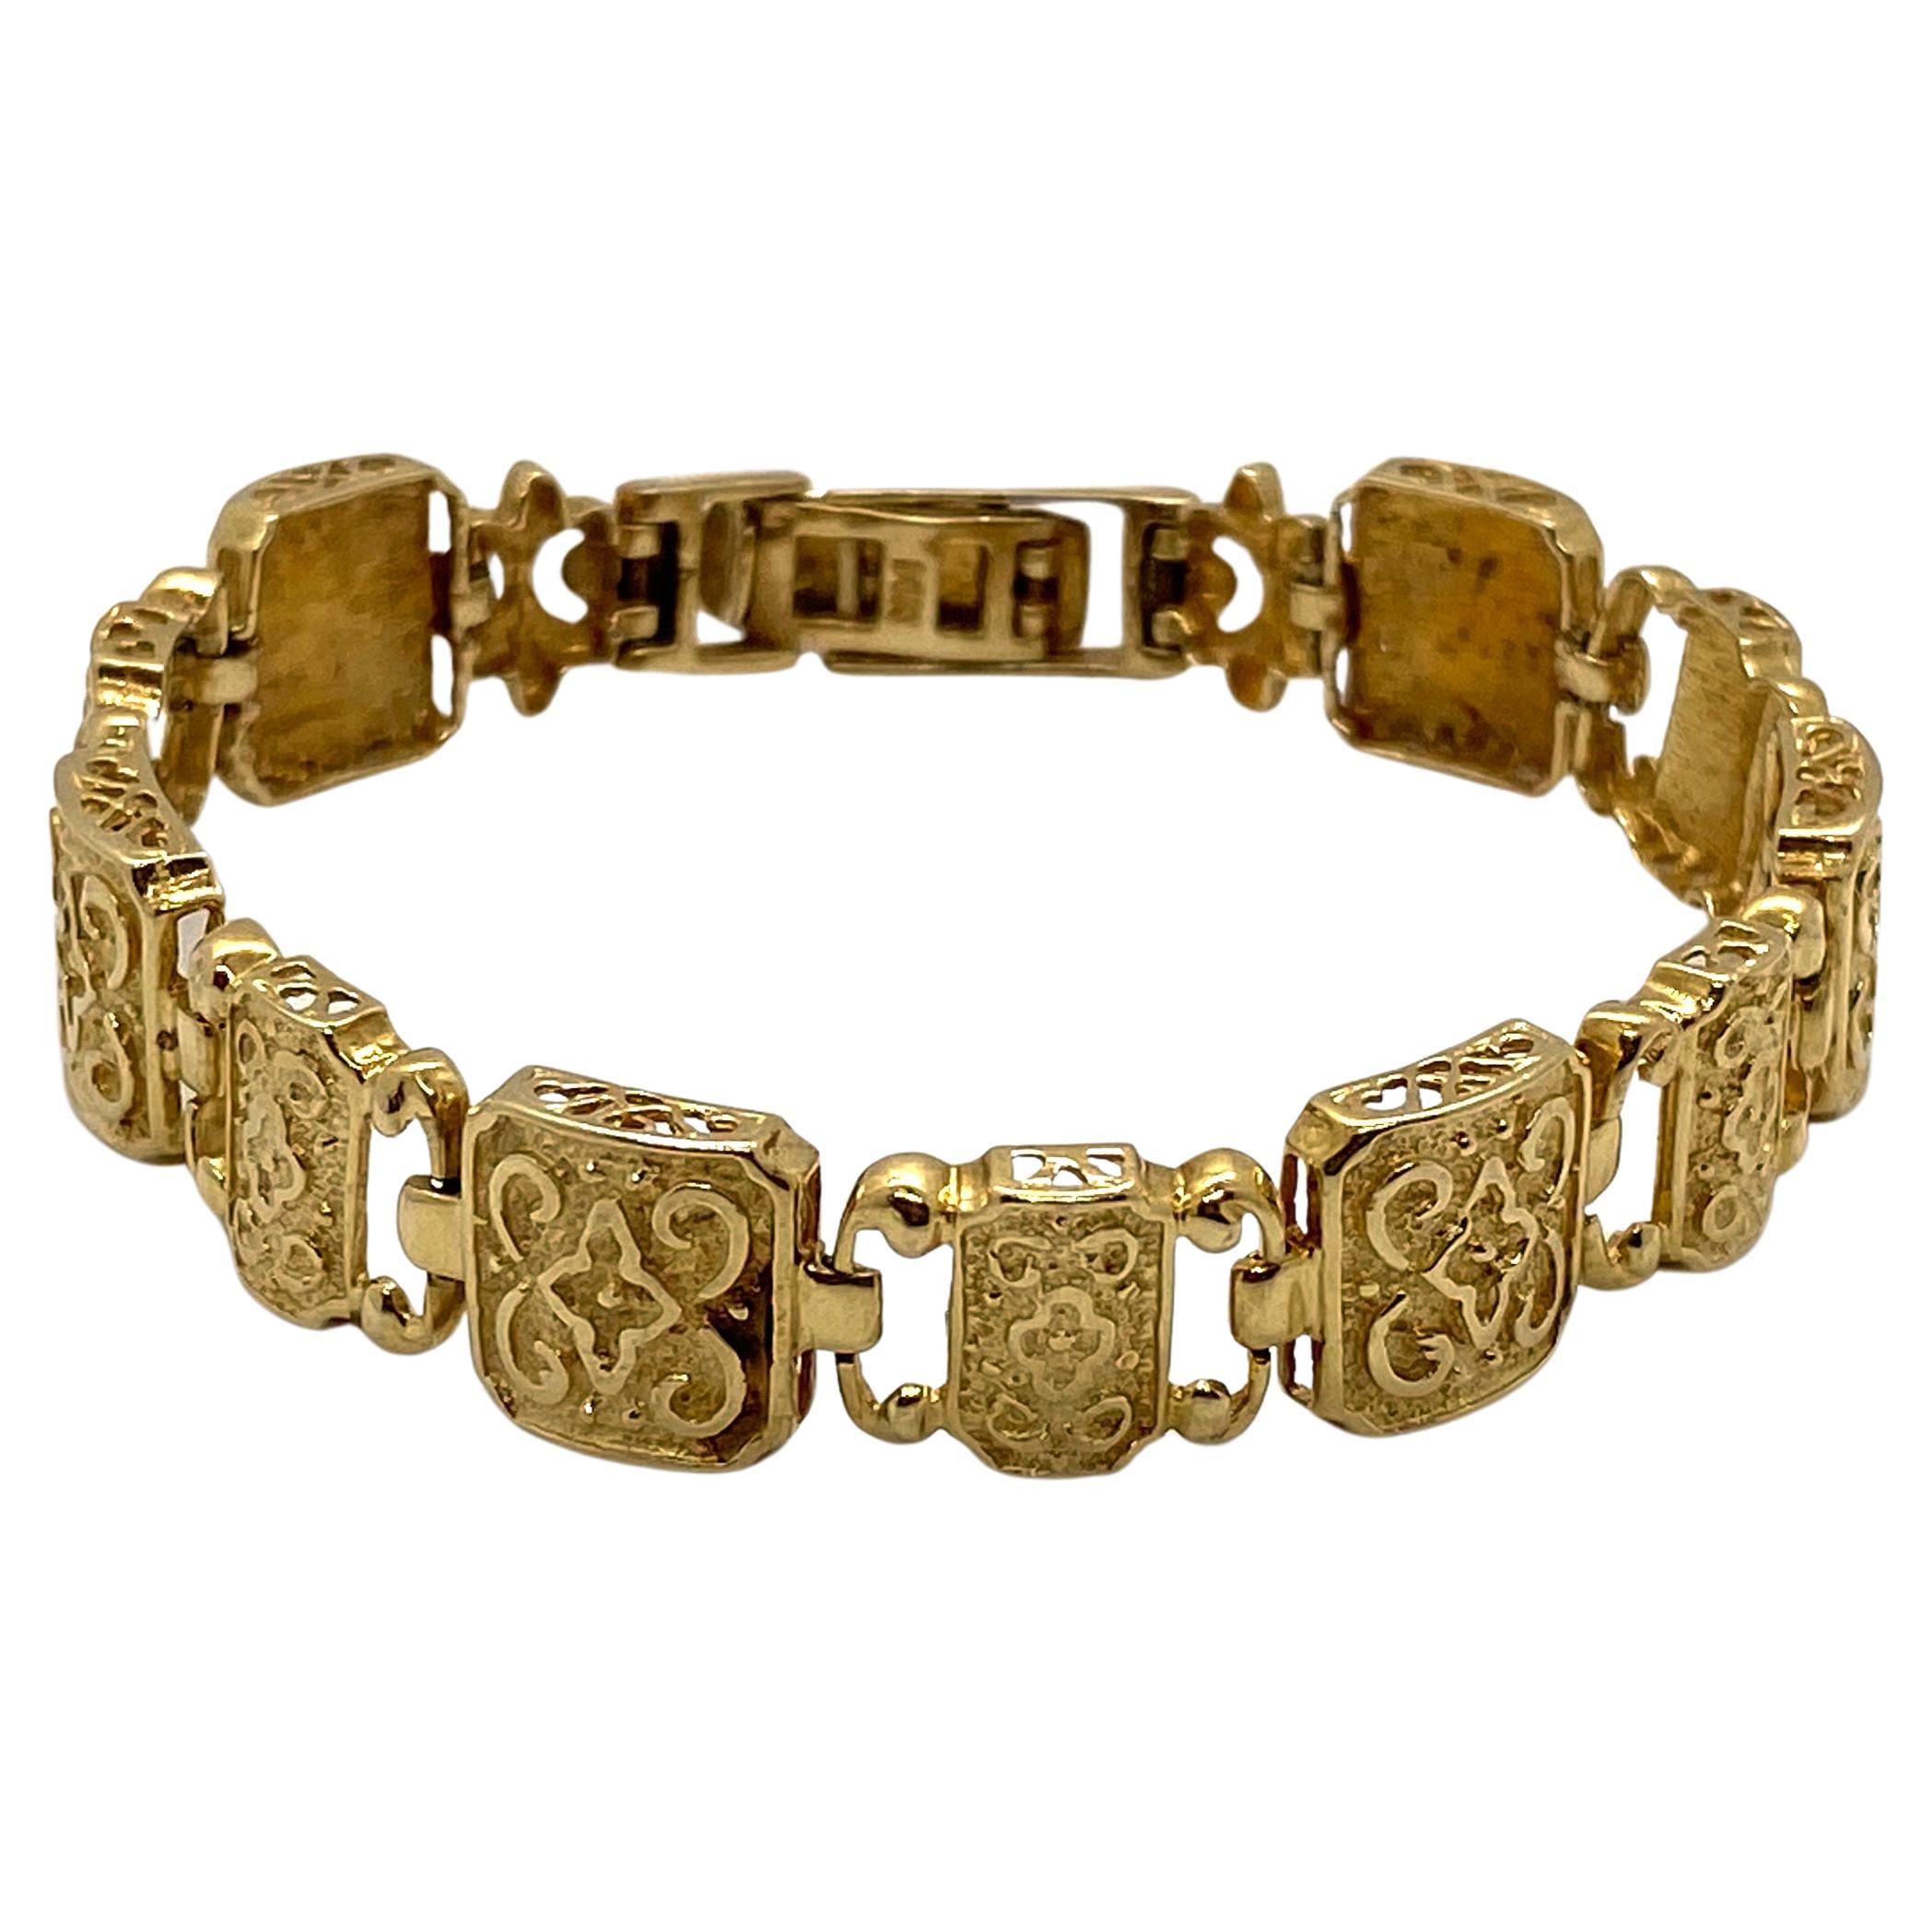 Preowned 14K Yellow Gold Byzantine Style Square Link Bracelet For Sale